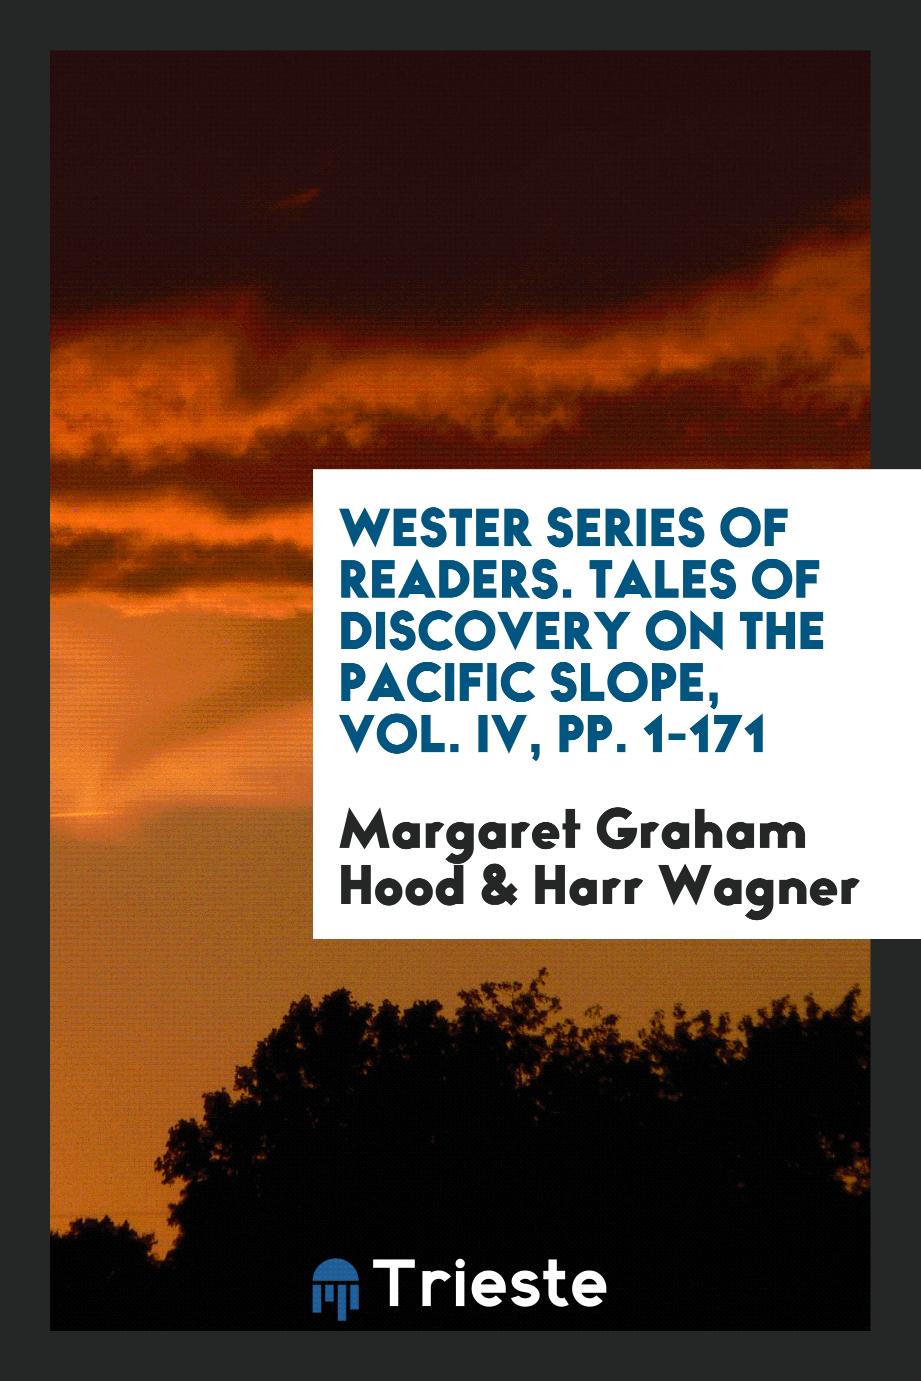 Wester Series of Readers. Tales of Discovery on the Pacific Slope, Vol. IV, pp. 1-171